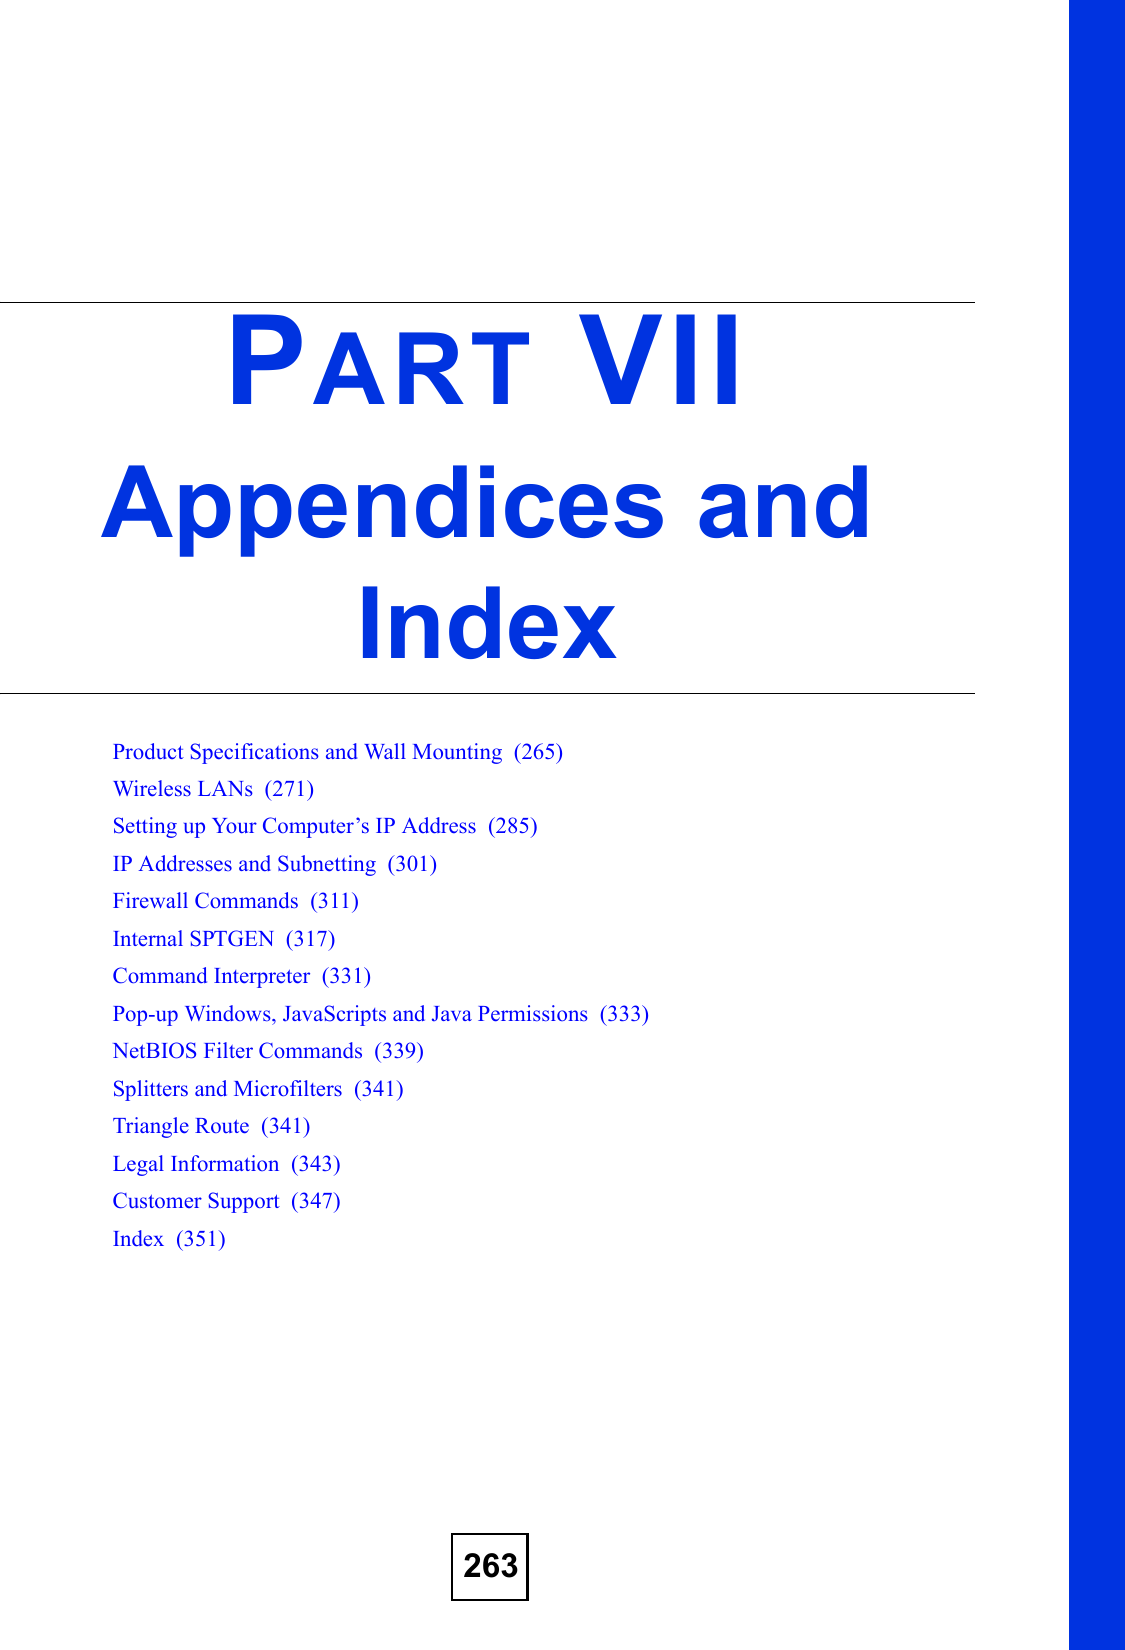 263PART VIIAppendices and IndexProduct Specifications and Wall Mounting  (265)Wireless LANs  (271)Setting up Your Computer’s IP Address  (285)IP Addresses and Subnetting  (301)Firewall Commands  (311)Internal SPTGEN  (317)Command Interpreter  (331)Pop-up Windows, JavaScripts and Java Permissions  (333)NetBIOS Filter Commands  (339)Splitters and Microfilters  (341)Triangle Route  (341)Legal Information  (343)Customer Support  (347)Index  (351)